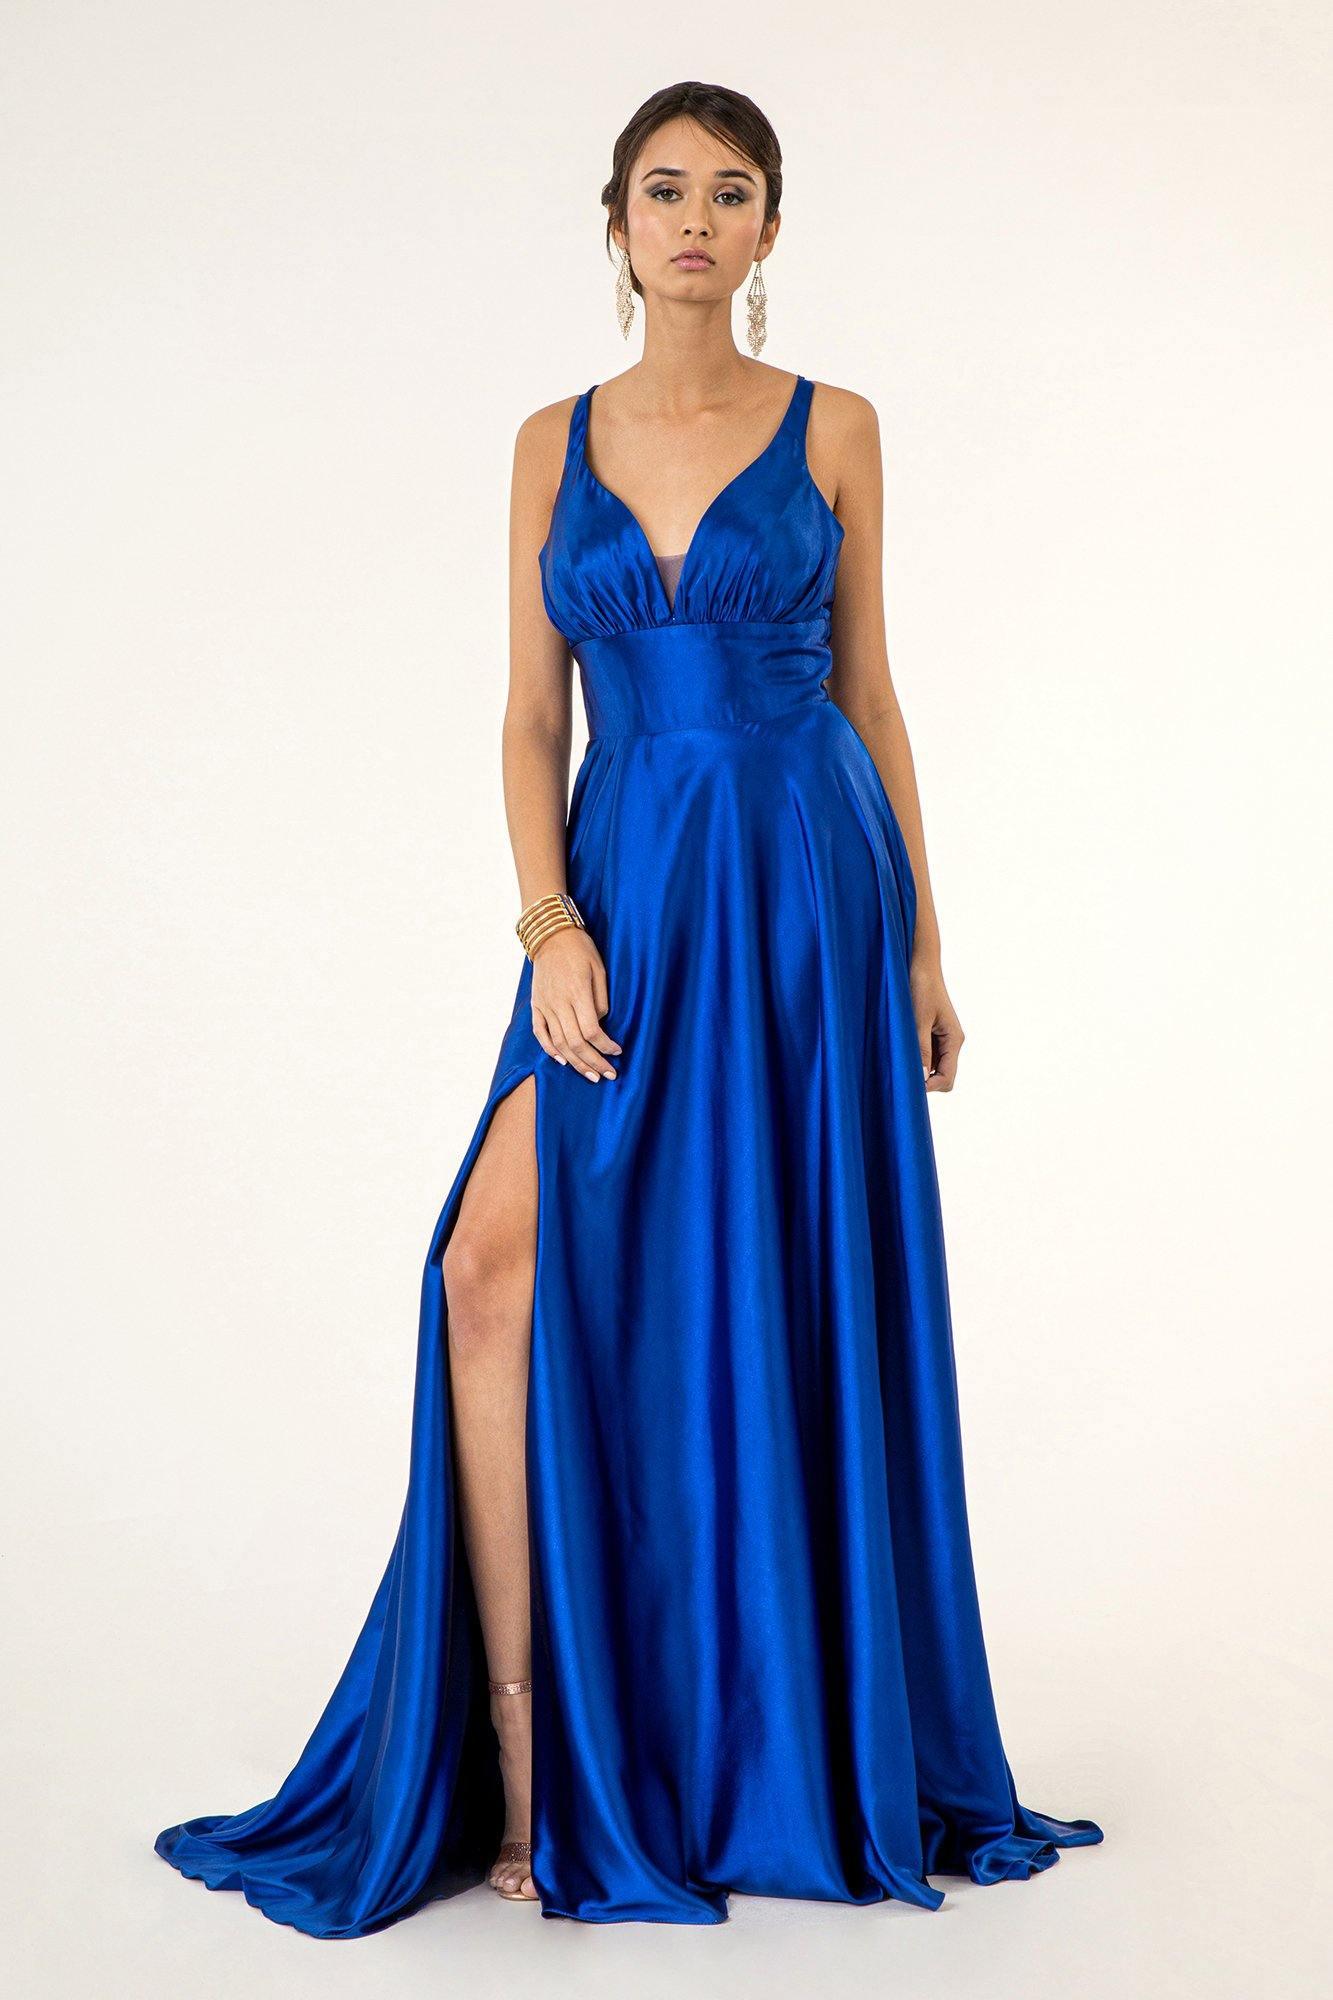 Sleeveless Red Long Prom Dress Sale - The Dress Outlet